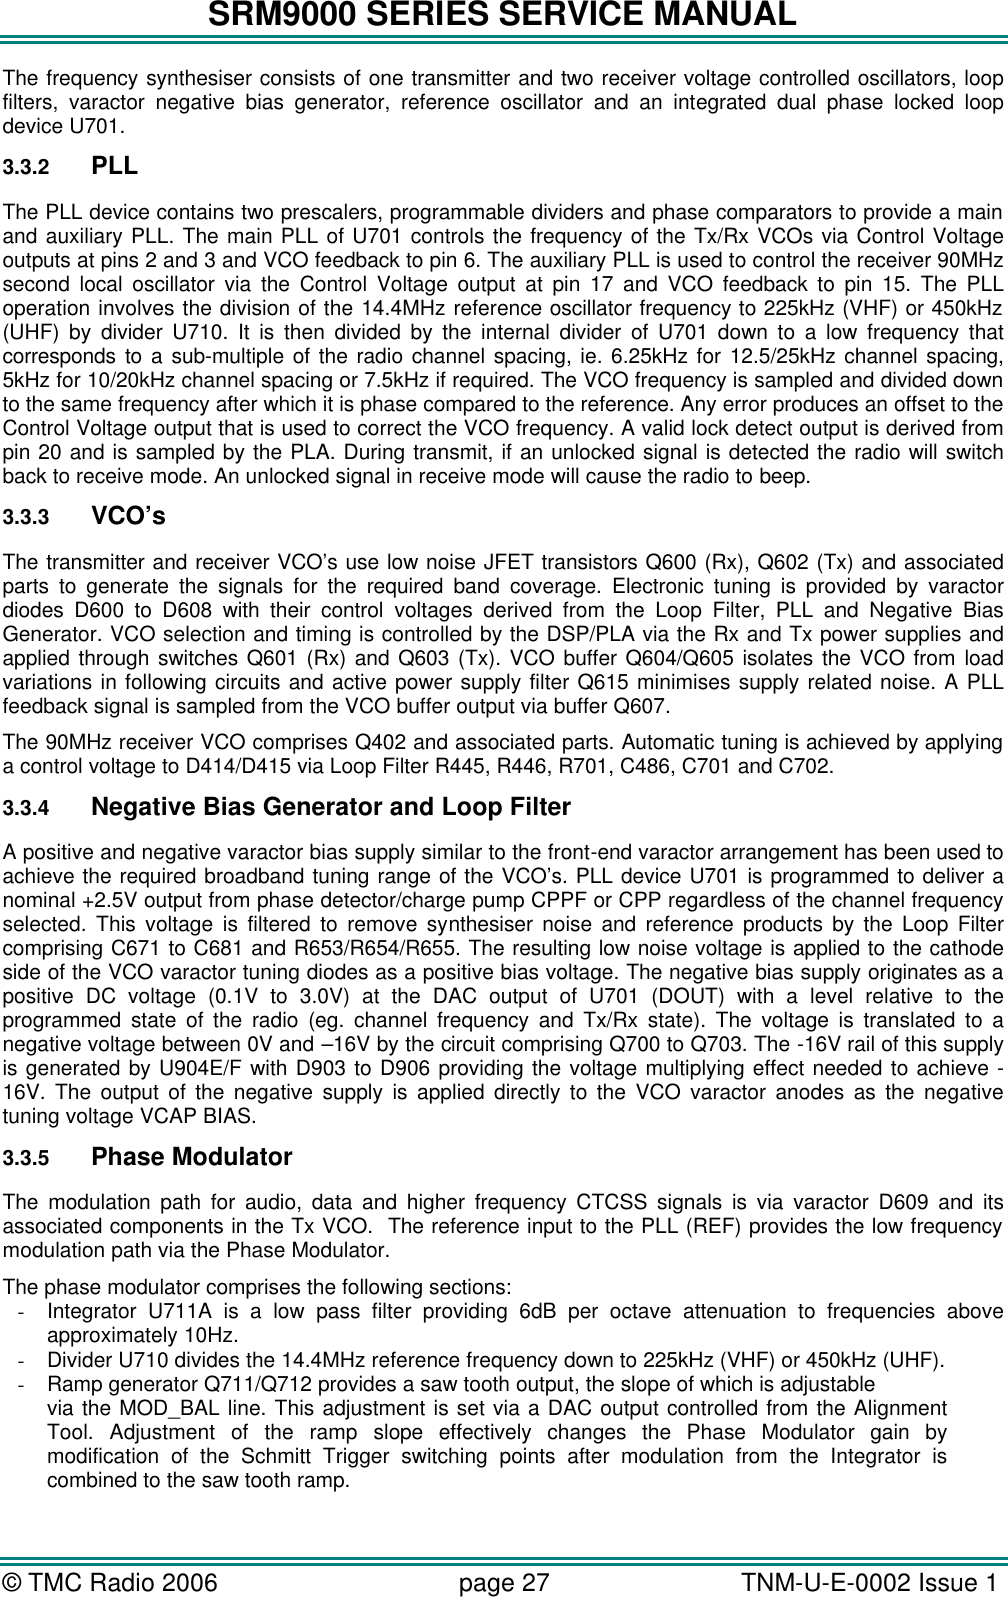 SRM9000 SERIES SERVICE MANUAL © TMC Radio 2006 page 27   TNM-U-E-0002 Issue 1  The frequency synthesiser consists of one transmitter and two receiver voltage controlled oscillators, loop filters, varactor negative bias generator, reference oscillator and an integrated dual phase locked loop device U701.  3.3.2 PLL The PLL device contains two prescalers, programmable dividers and phase comparators to provide a main and auxiliary PLL. The main PLL of U701 controls the frequency of the Tx/Rx VCOs via Control Voltage outputs at pins 2 and 3 and VCO feedback to pin 6. The auxiliary PLL is used to control the receiver 90MHz second local oscillator via the Control Voltage output at pin 17 and VCO feedback to pin 15. The PLL operation involves the division of the 14.4MHz reference oscillator frequency to 225kHz (VHF) or 450kHz (UHF) by divider U710. It is then divided by the internal divider of U701 down to a low frequency that corresponds to a sub-multiple of the radio channel spacing, ie. 6.25kHz for 12.5/25kHz channel spacing, 5kHz for 10/20kHz channel spacing or 7.5kHz if required. The VCO frequency is sampled and divided down to the same frequency after which it is phase compared to the reference. Any error produces an offset to the Control Voltage output that is used to correct the VCO frequency. A valid lock detect output is derived from pin 20 and is sampled by the PLA. During transmit, if an unlocked signal is detected the radio will switch back to receive mode. An unlocked signal in receive mode will cause the radio to beep. 3.3.3 VCO’s The transmitter and receiver VCO’s use low noise JFET transistors Q600 (Rx), Q602 (Tx) and associated parts to generate the signals for the required band coverage. Electronic tuning is provided by varactor diodes D600 to D608 with their control voltages derived from the Loop Filter, PLL and Negative Bias Generator. VCO selection and timing is controlled by the DSP/PLA via the Rx and Tx power supplies and applied through switches Q601 (Rx) and Q603 (Tx). VCO buffer Q604/Q605 isolates the VCO from load variations in following circuits and active power supply filter Q615 minimises supply related noise. A PLL feedback signal is sampled from the VCO buffer output via buffer Q607. The 90MHz receiver VCO comprises Q402 and associated parts. Automatic tuning is achieved by applying a control voltage to D414/D415 via Loop Filter R445, R446, R701, C486, C701 and C702. 3.3.4 Negative Bias Generator and Loop Filter A positive and negative varactor bias supply similar to the front-end varactor arrangement has been used to achieve the required broadband tuning range of the VCO’s. PLL device U701 is programmed to deliver a nominal +2.5V output from phase detector/charge pump CPPF or CPP regardless of the channel frequency selected. This voltage is filtered to remove synthesiser noise and reference products by the Loop Filter comprising C671 to C681 and R653/R654/R655. The resulting low noise voltage is applied to the cathode side of the VCO varactor tuning diodes as a positive bias voltage. The negative bias supply originates as a positive DC voltage (0.1V to 3.0V) at the DAC output of U701 (DOUT) with a level relative to the programmed state of the radio (eg. channel frequency and Tx/Rx state). The voltage is translated to a negative voltage between 0V and –16V by the circuit comprising Q700 to Q703. The -16V rail of this supply is generated by U904E/F with D903 to D906 providing the voltage multiplying effect needed to achieve -16V. The output of the negative supply is applied directly to the VCO varactor anodes as the negative tuning voltage VCAP BIAS.  3.3.5 Phase Modulator The modulation path for audio, data and higher frequency CTCSS signals is via varactor D609 and its associated components in the Tx VCO.  The reference input to the PLL (REF) provides the low frequency modulation path via the Phase Modulator.  The phase modulator comprises the following sections: - Integrator U711A is a low pass filter providing 6dB per octave attenuation to frequencies above approximately 10Hz. - Divider U710 divides the 14.4MHz reference frequency down to 225kHz (VHF) or 450kHz (UHF). - Ramp generator Q711/Q712 provides a saw tooth output, the slope of which is adjustable via the MOD_BAL line. This adjustment is set via a DAC output controlled from the Alignment Tool. Adjustment of the ramp slope effectively changes the Phase Modulator gain by modification of the Schmitt Trigger switching points after modulation from the Integrator is combined to the saw tooth ramp. 